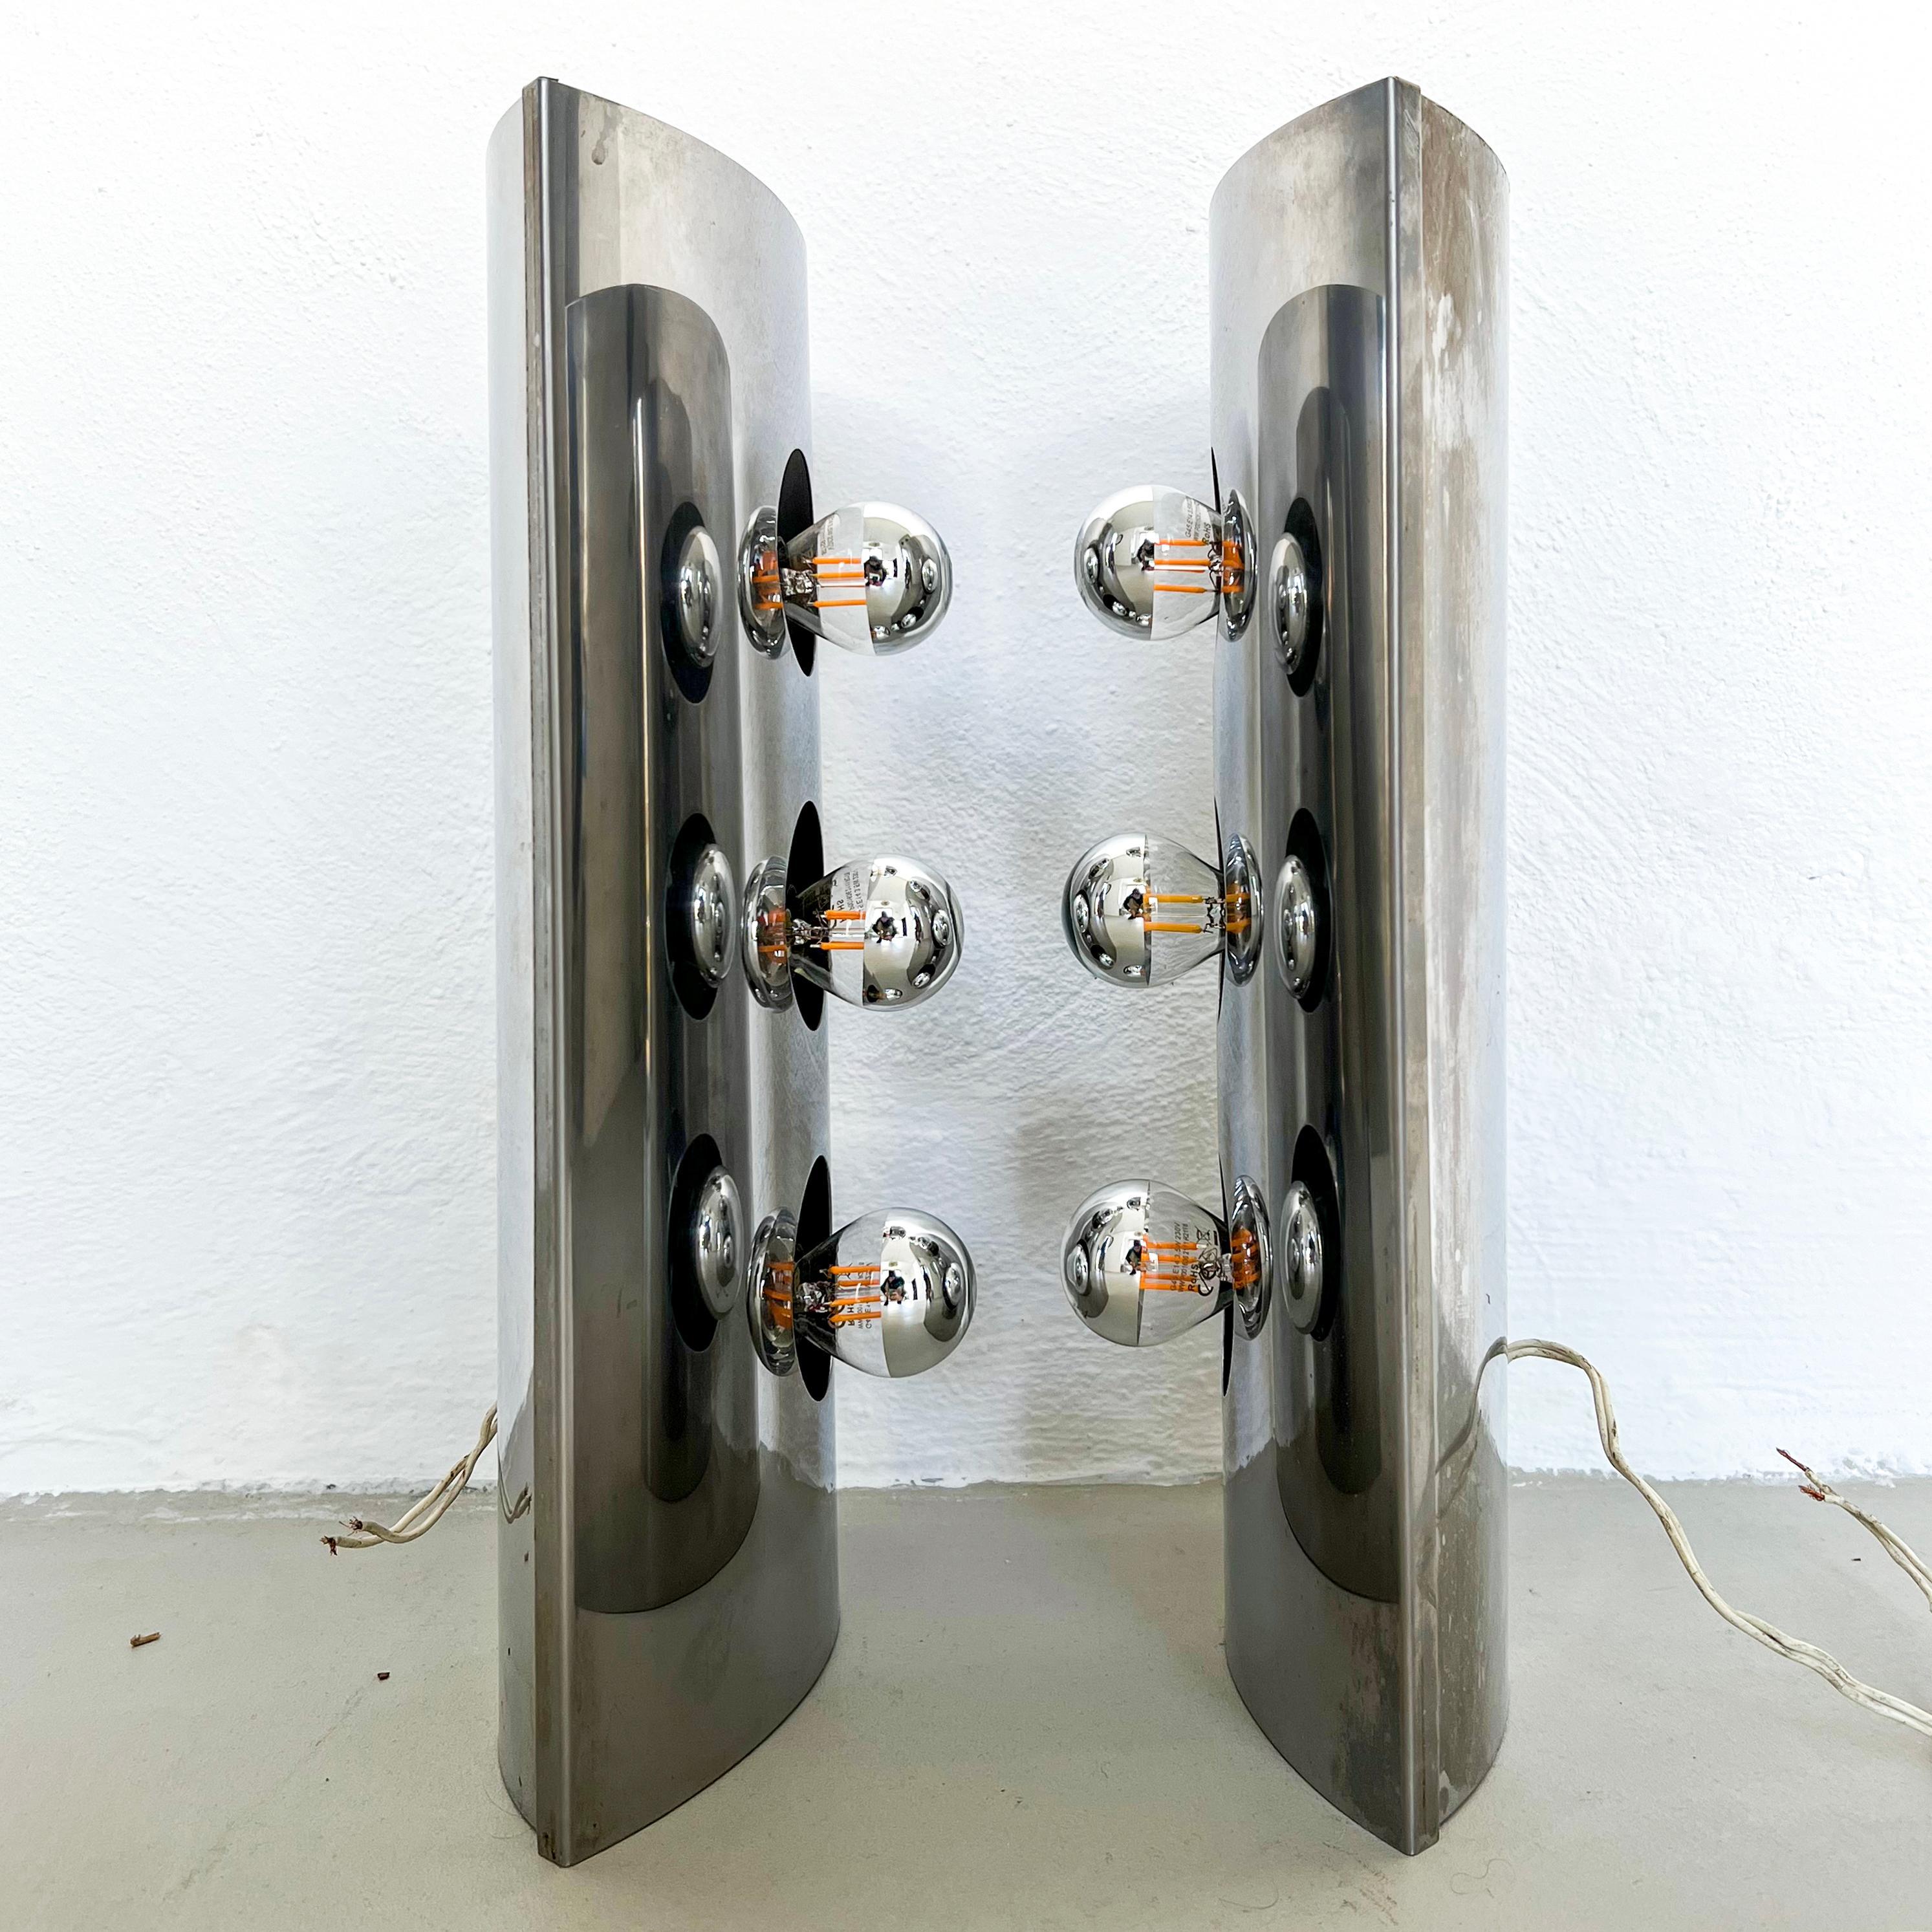 Pair of Vintage Reggiani Sconces in Stainless Steel, Italian Space Age, 1960s For Sale 2